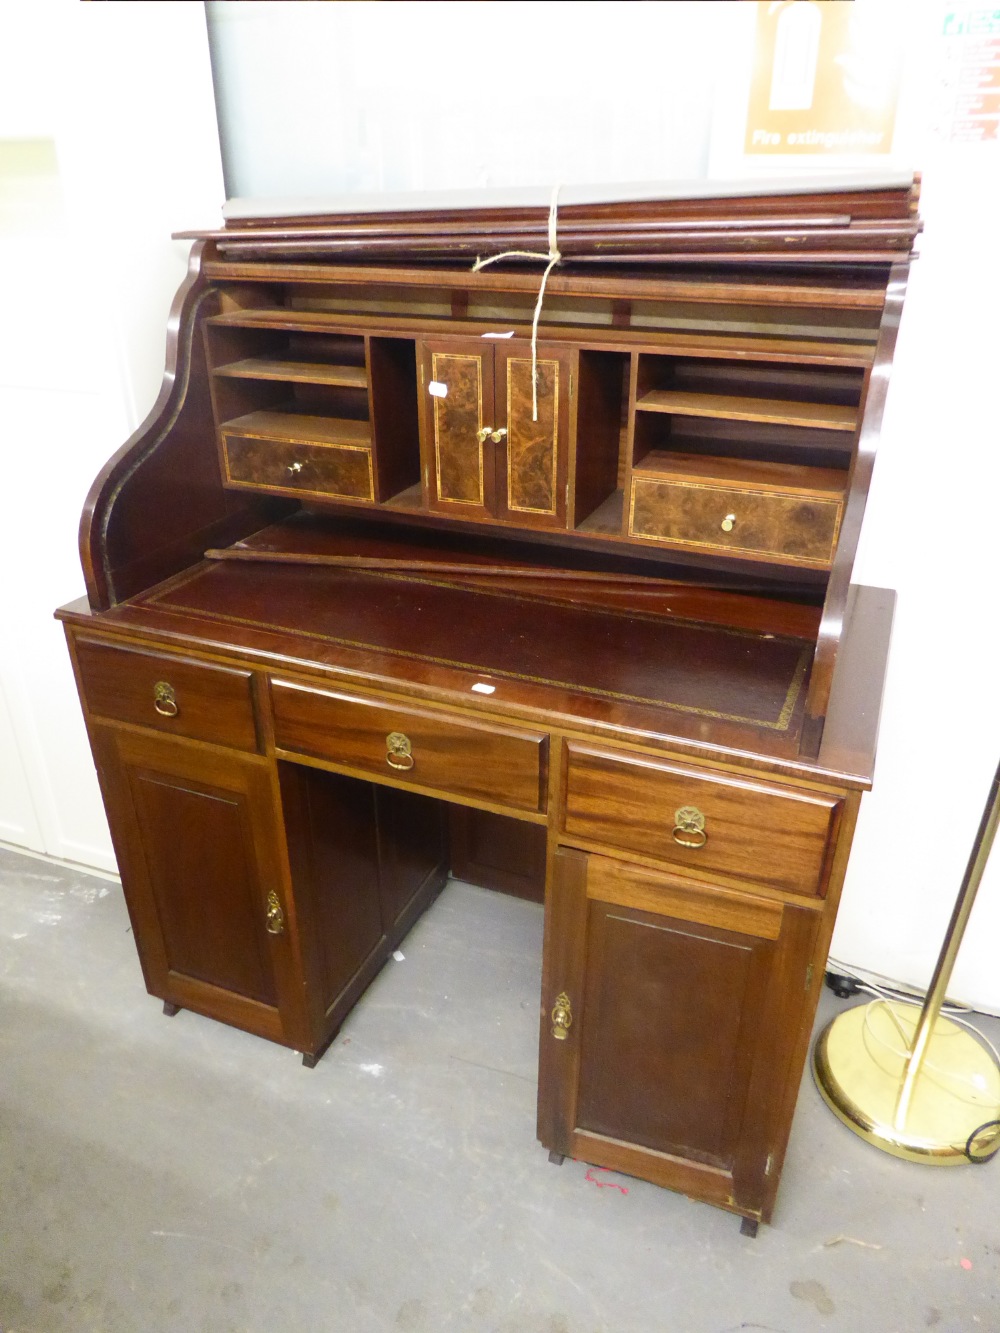 REPRODUCTION WRITING DESK WITH ROLL-TOP (DETACHED), LEATHER TOP, CUPBOARDS AND DRAWRES TO THE FITTED